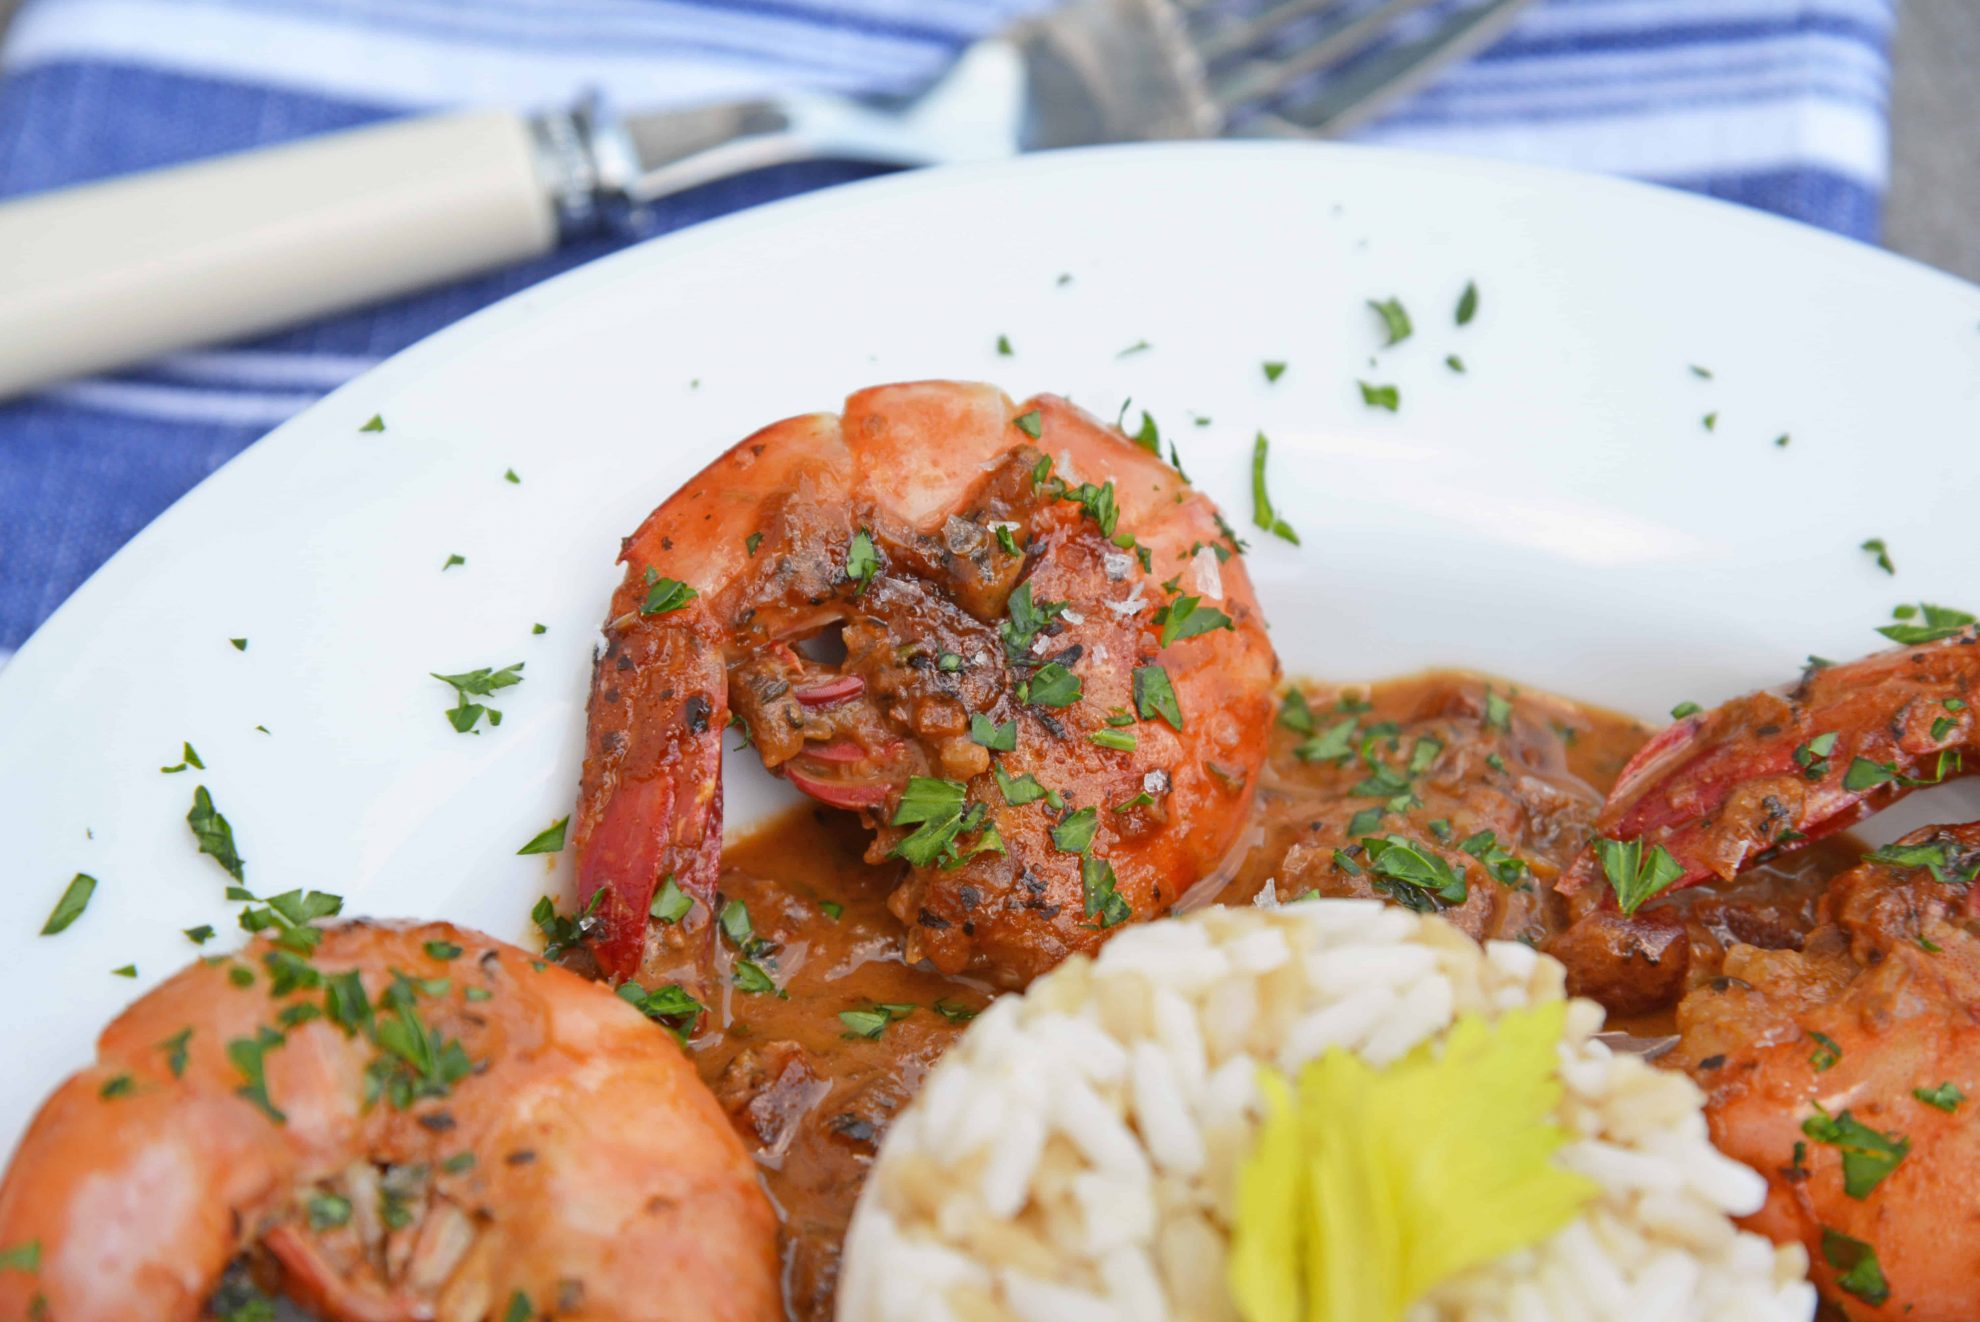 Voodoo Shrimp Creole is a tomato-based dish using shrimp and beer to make a sweet and spicy broth. Serve over rice or grits for a full meal. #voodooshrimp #shrimpcreole www.savoryexperiments.com 